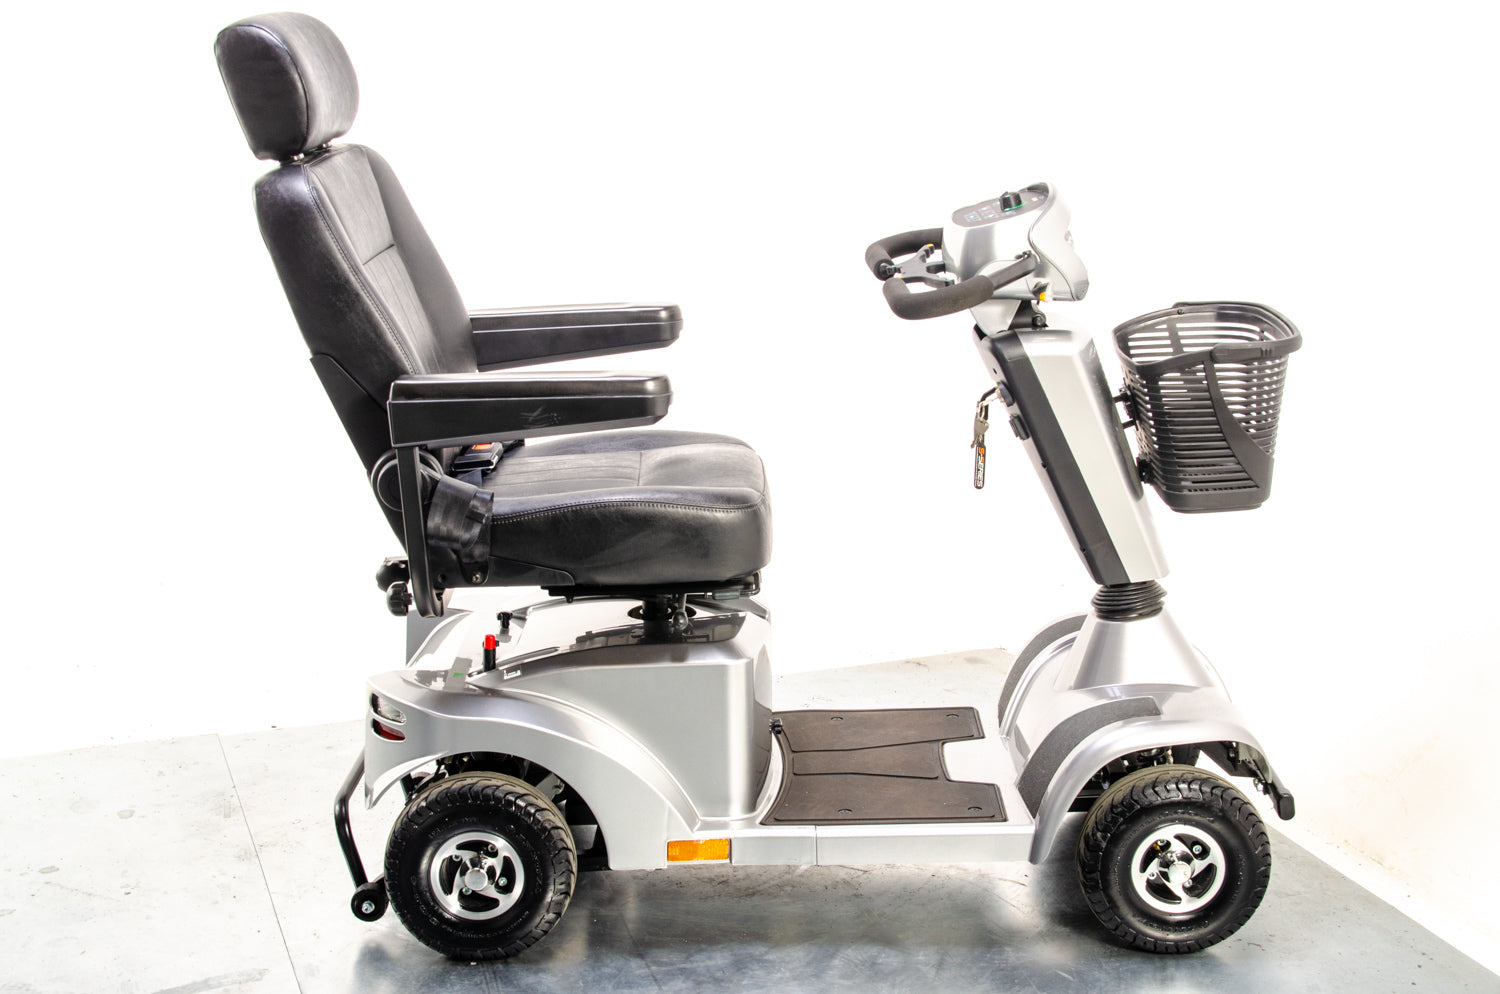 New Sterling S400 Mobility Scooter All-Terrain 4mph Midsize Pneumatic Pavement